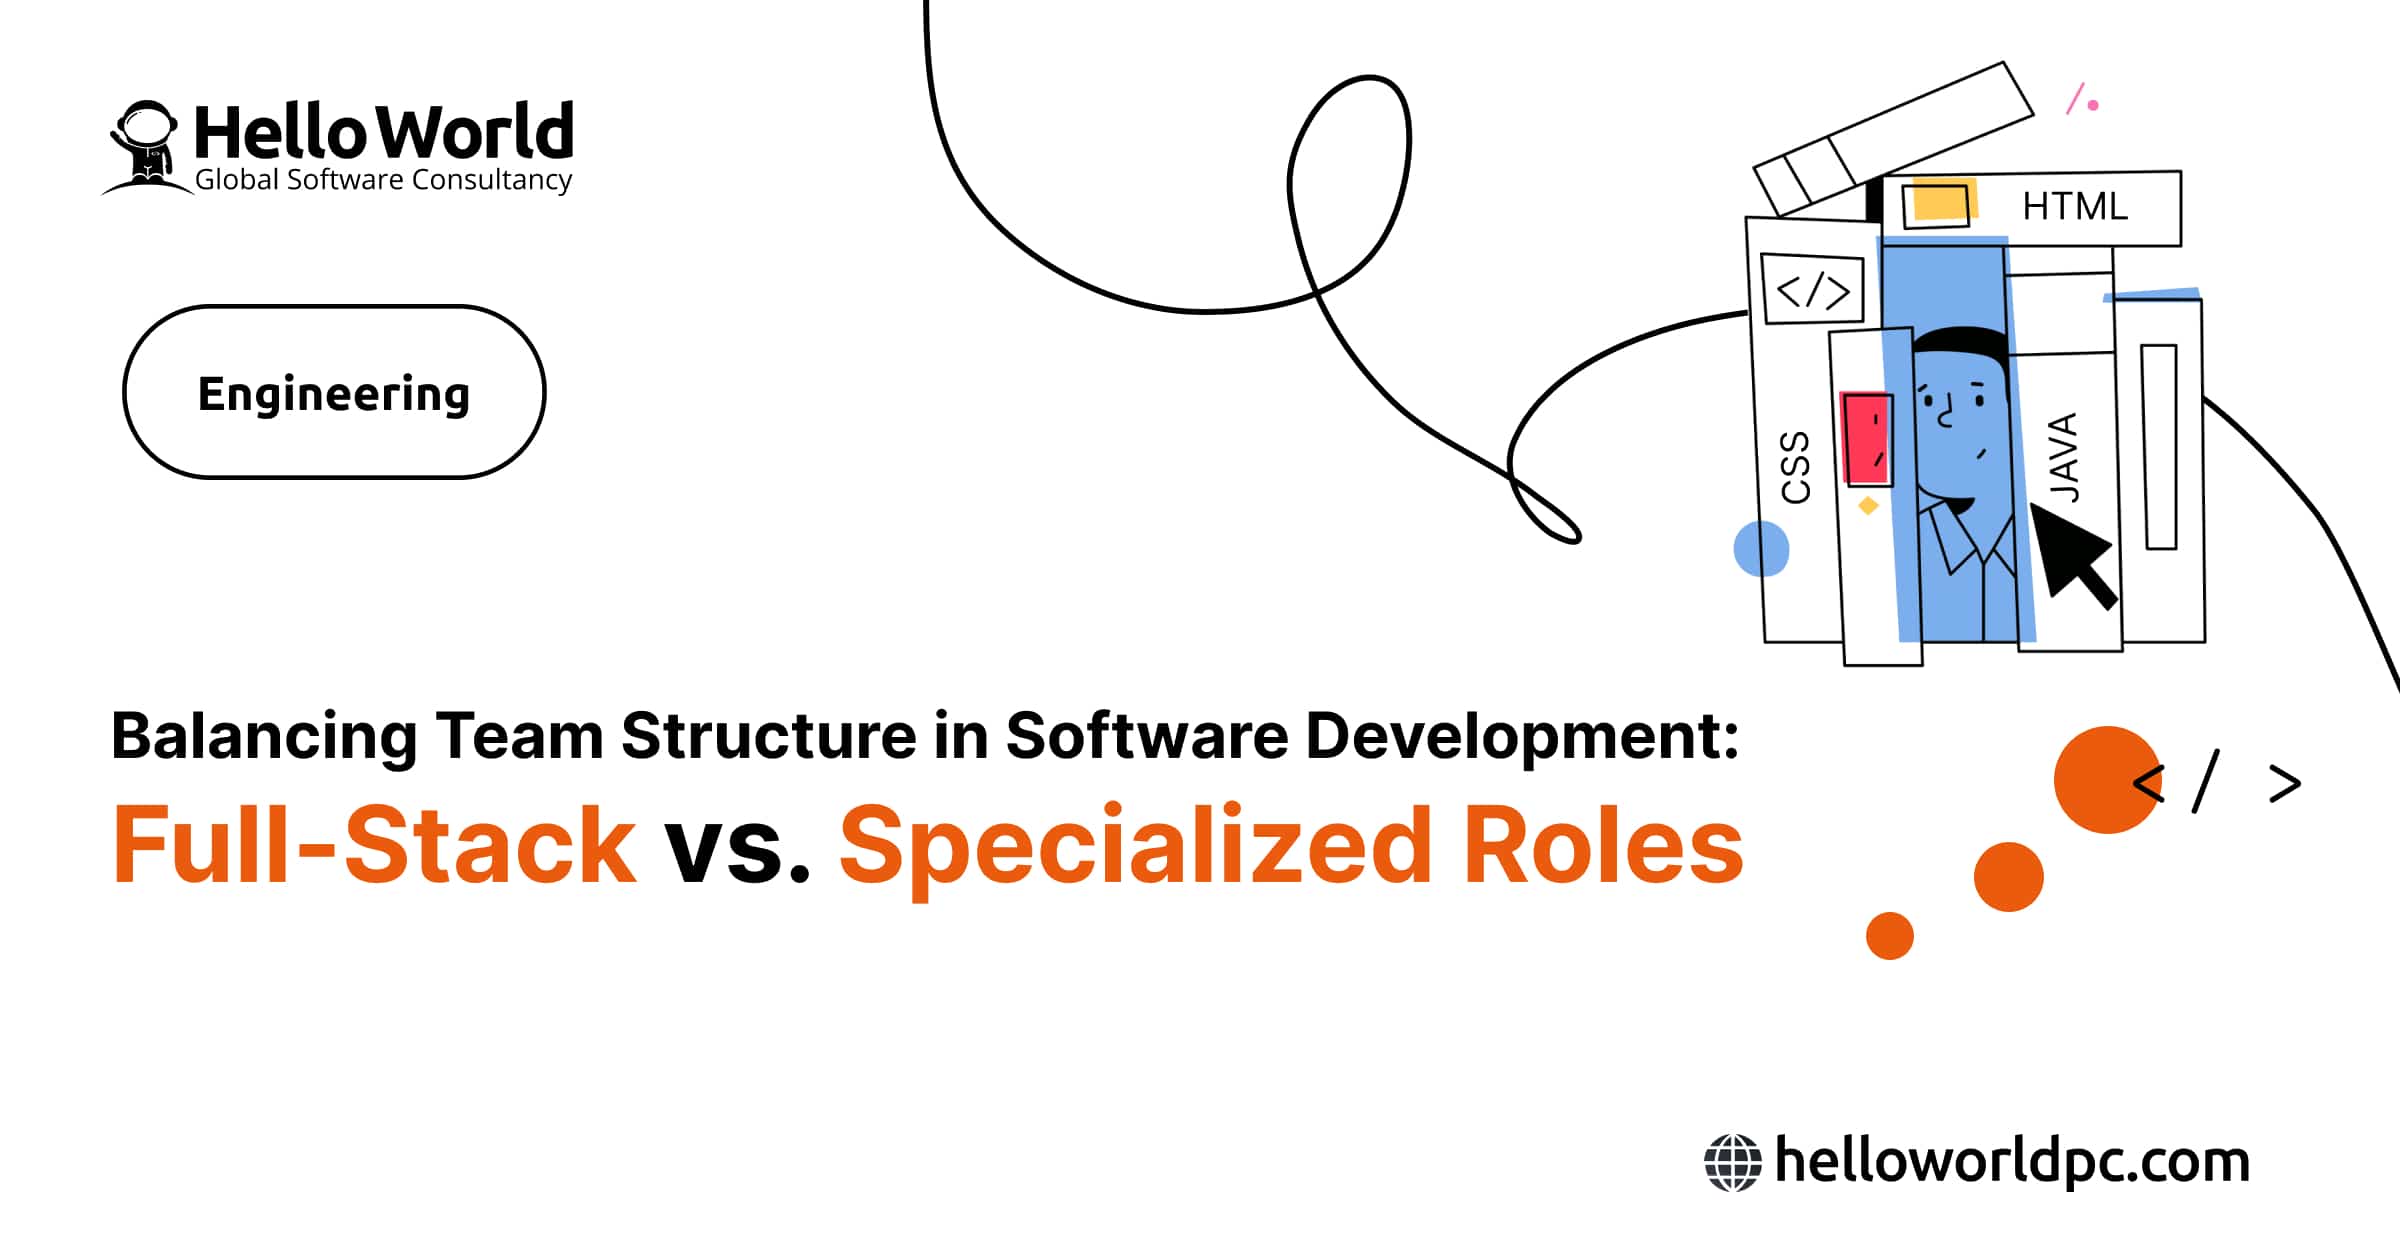 Balancing Team Structure in Software Development: Full-Stack vs. Specialized Roles